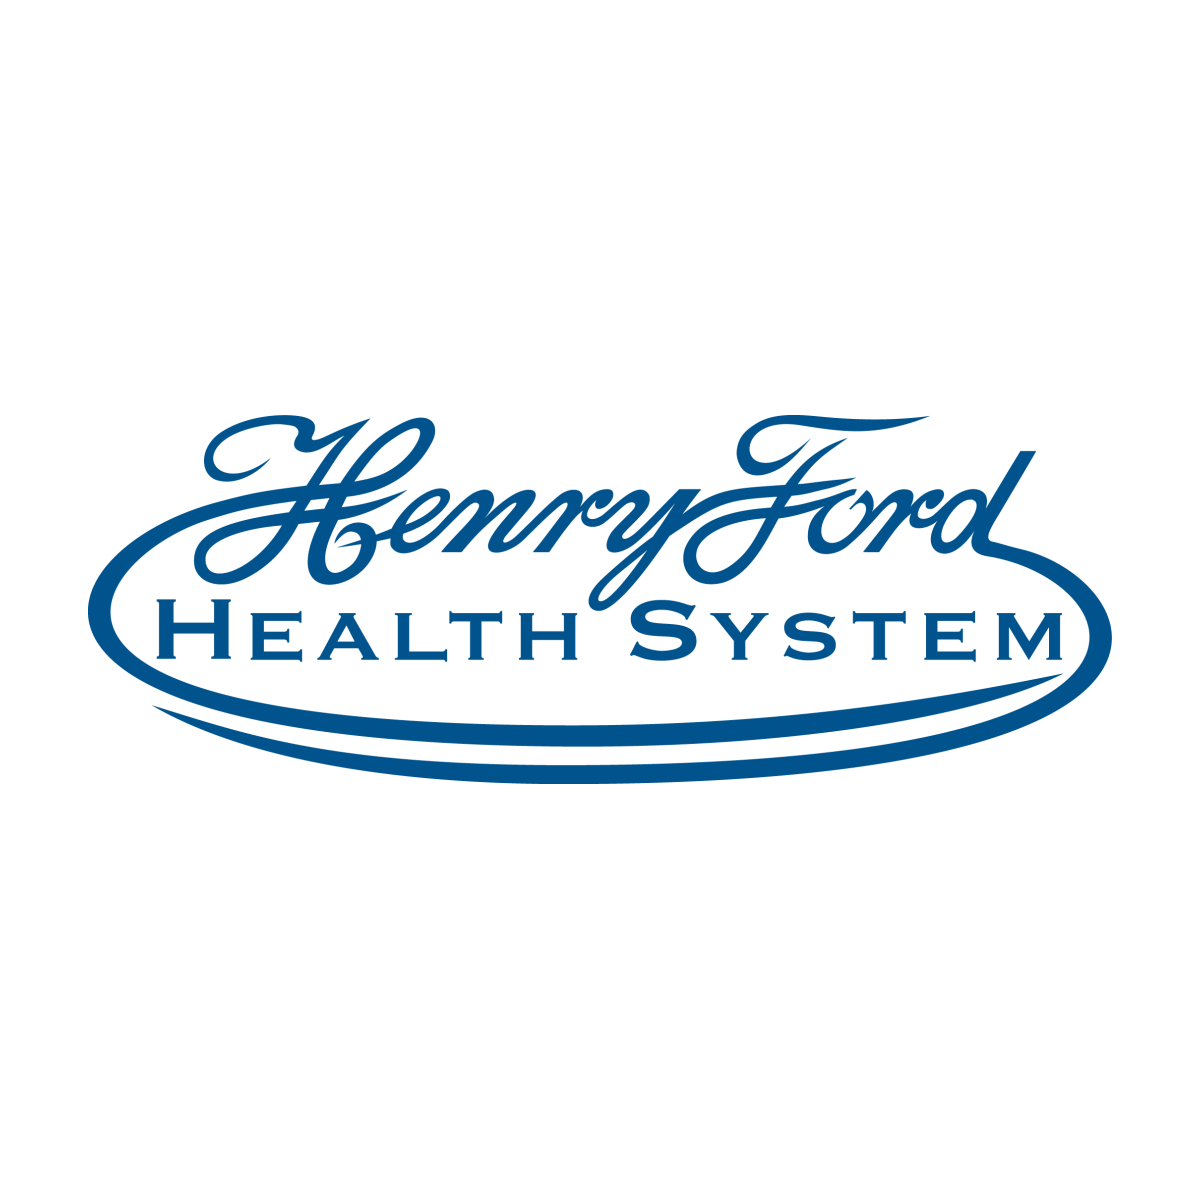 Henry Ford Health System Logo - Square